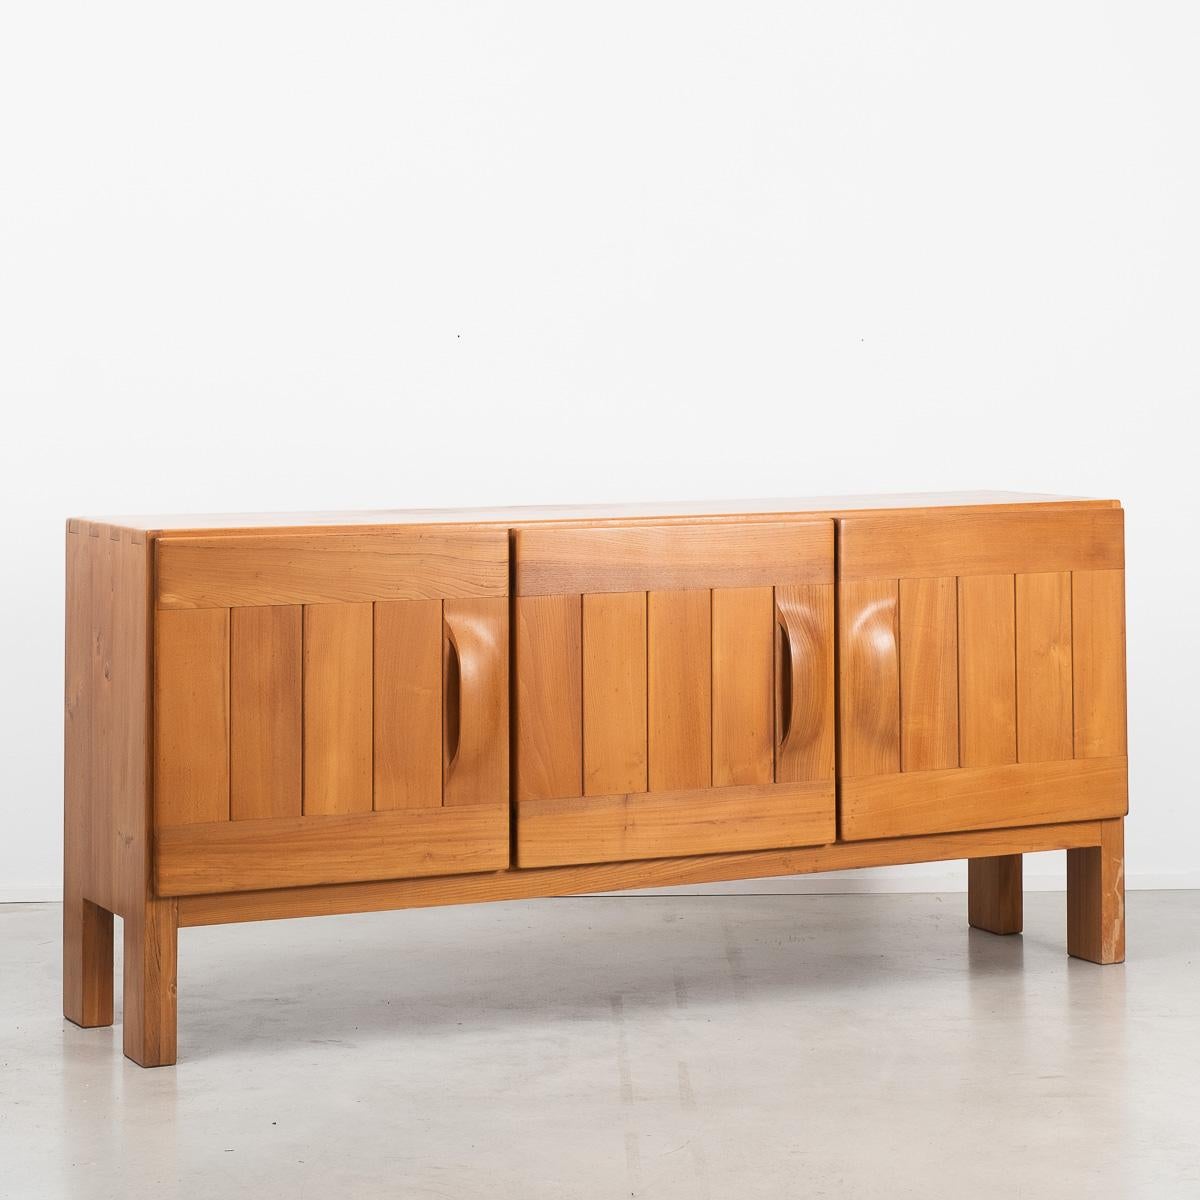 This well crafted sideboard by Maison Regain is made from solid elm wood. The key feature to this design is the curved handles which have been carved from a single piece of solid wood. The outer casing of this unit features great dovetail joins